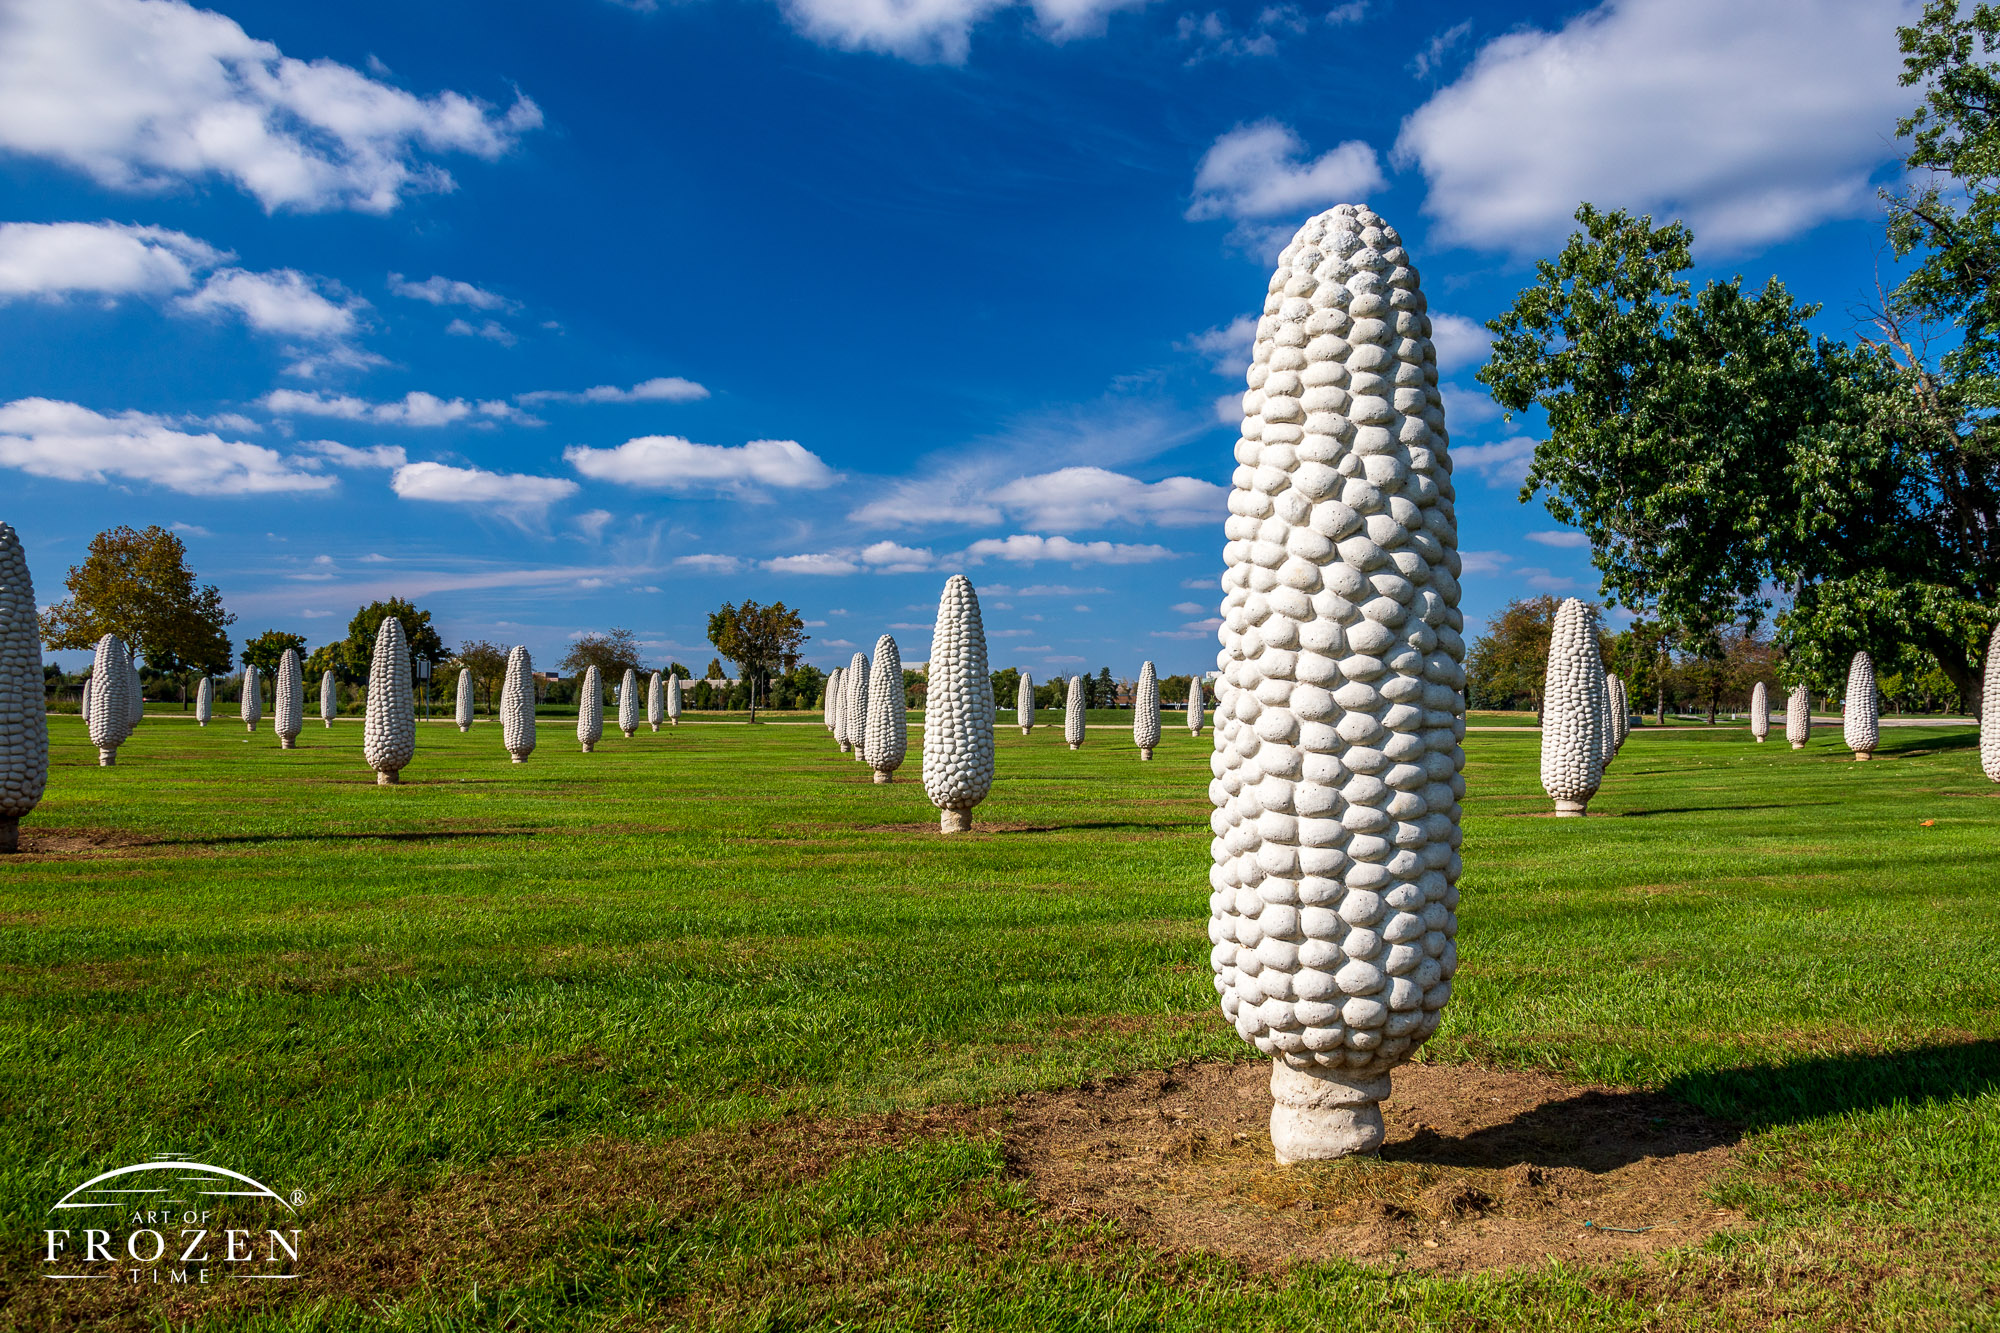 A field of six-foot tall concrete ears of corn which extends for many acres in Dublin Ohio